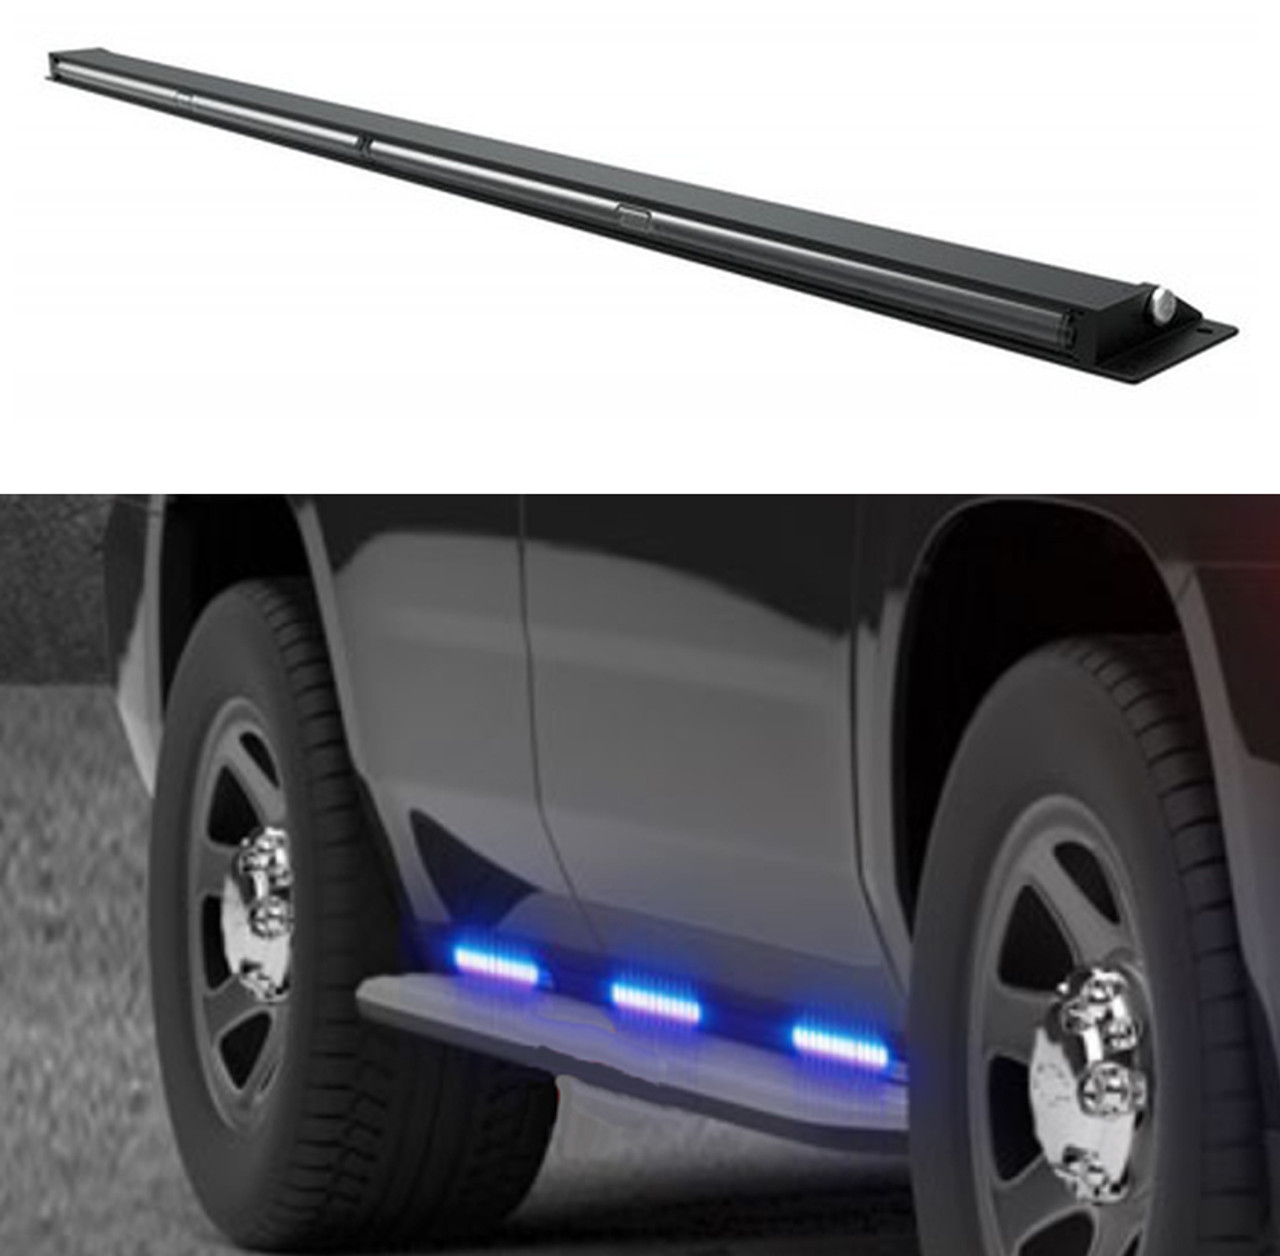 Code-3 Chevy Tahoe 2015-2020 & 2021+ Outliner C3RNR Perimeter Runner Board Light Bar Stick, 60 Inches, pair, fits driver and passenger side, kit, 2 colors per head,